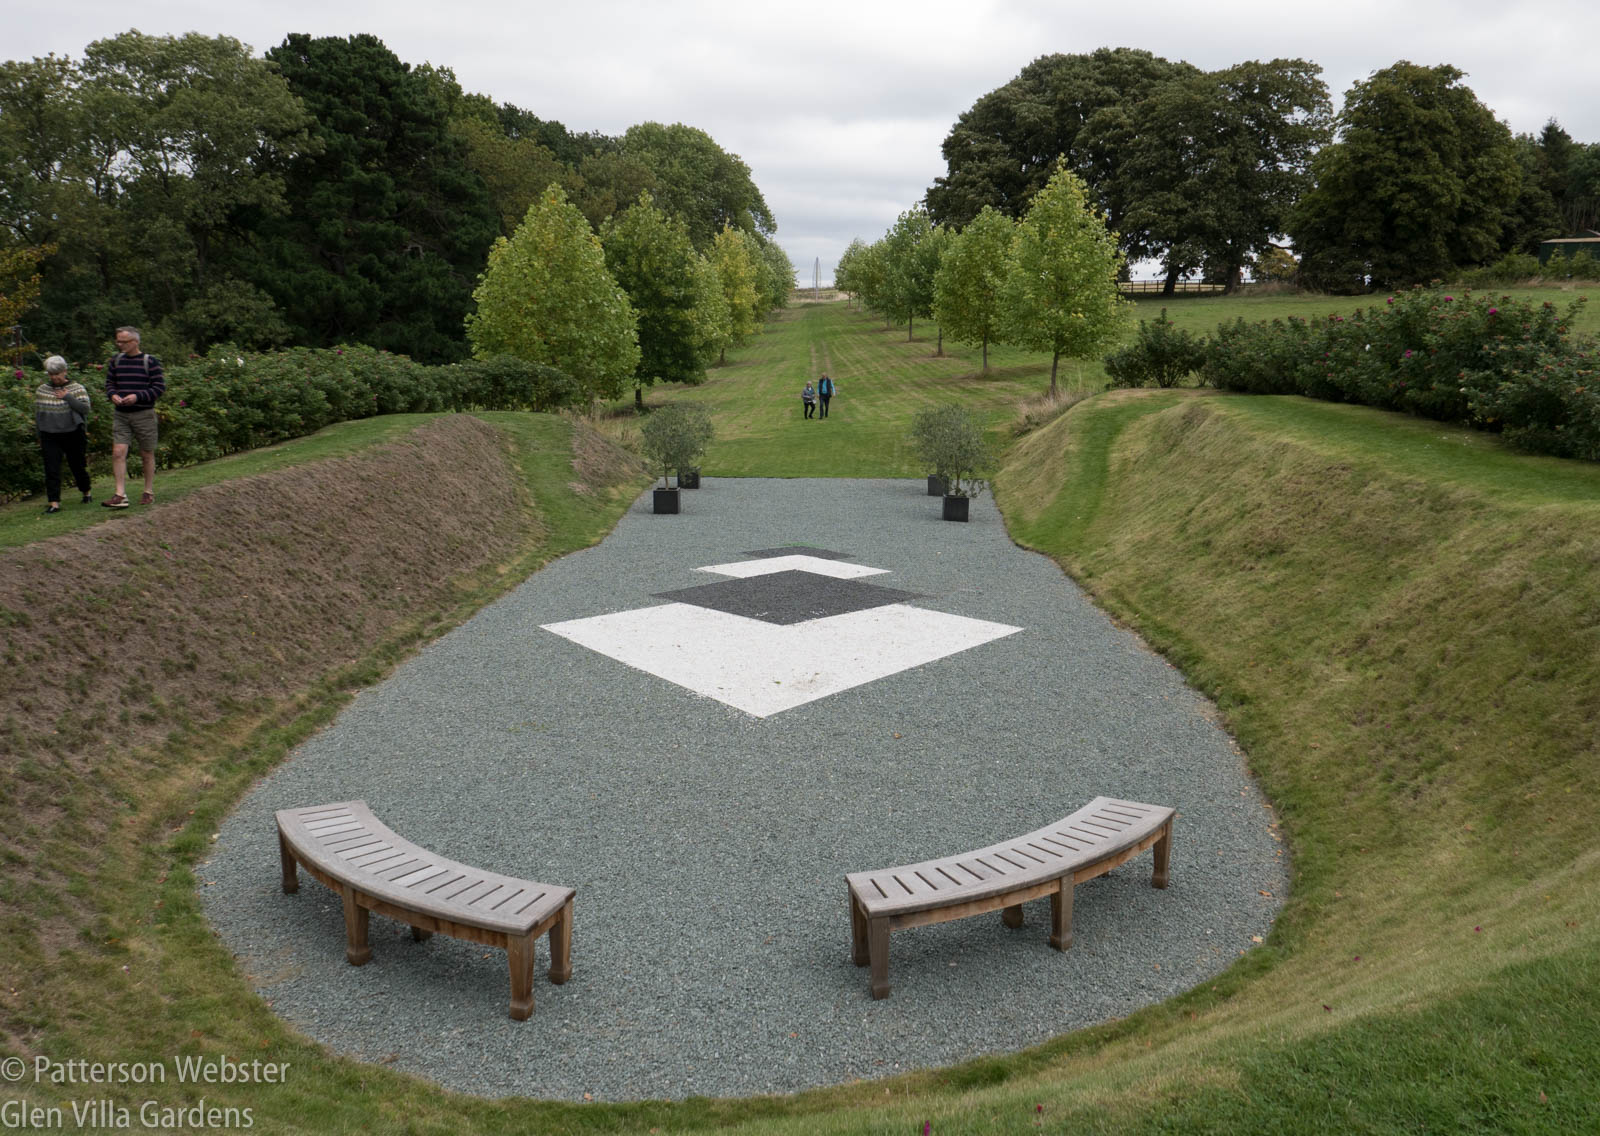 The curved benches are by Nicky Hodges.